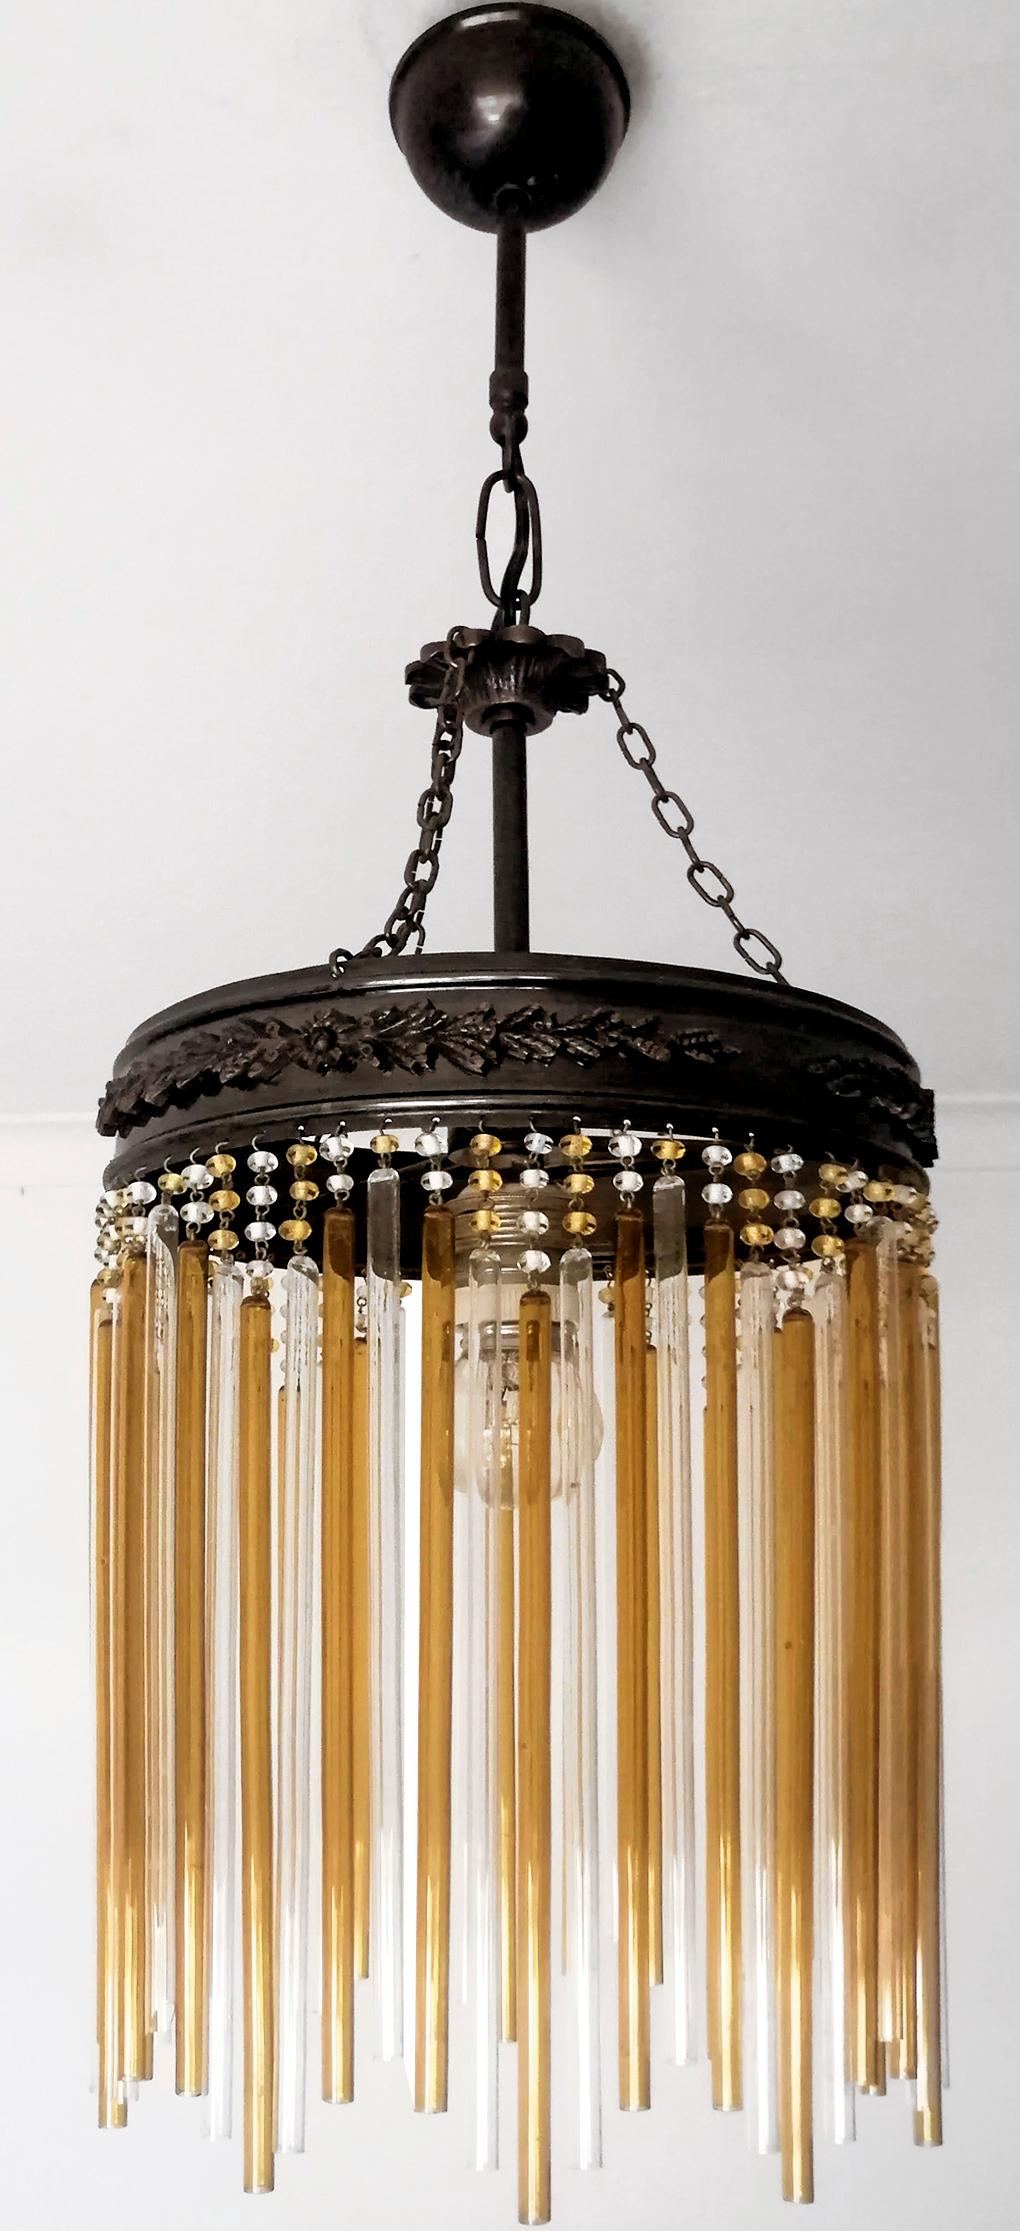 Beautiful antique Italian Art Nouveau and Art Deco Murano amber crystals chandelier in a radial pattern with a very sparkling effect typical of Hollywood style and glamour. 

Measures:
Diameter 7.88 in /20 cm
Height 23.63 in / 60 cm
1-light